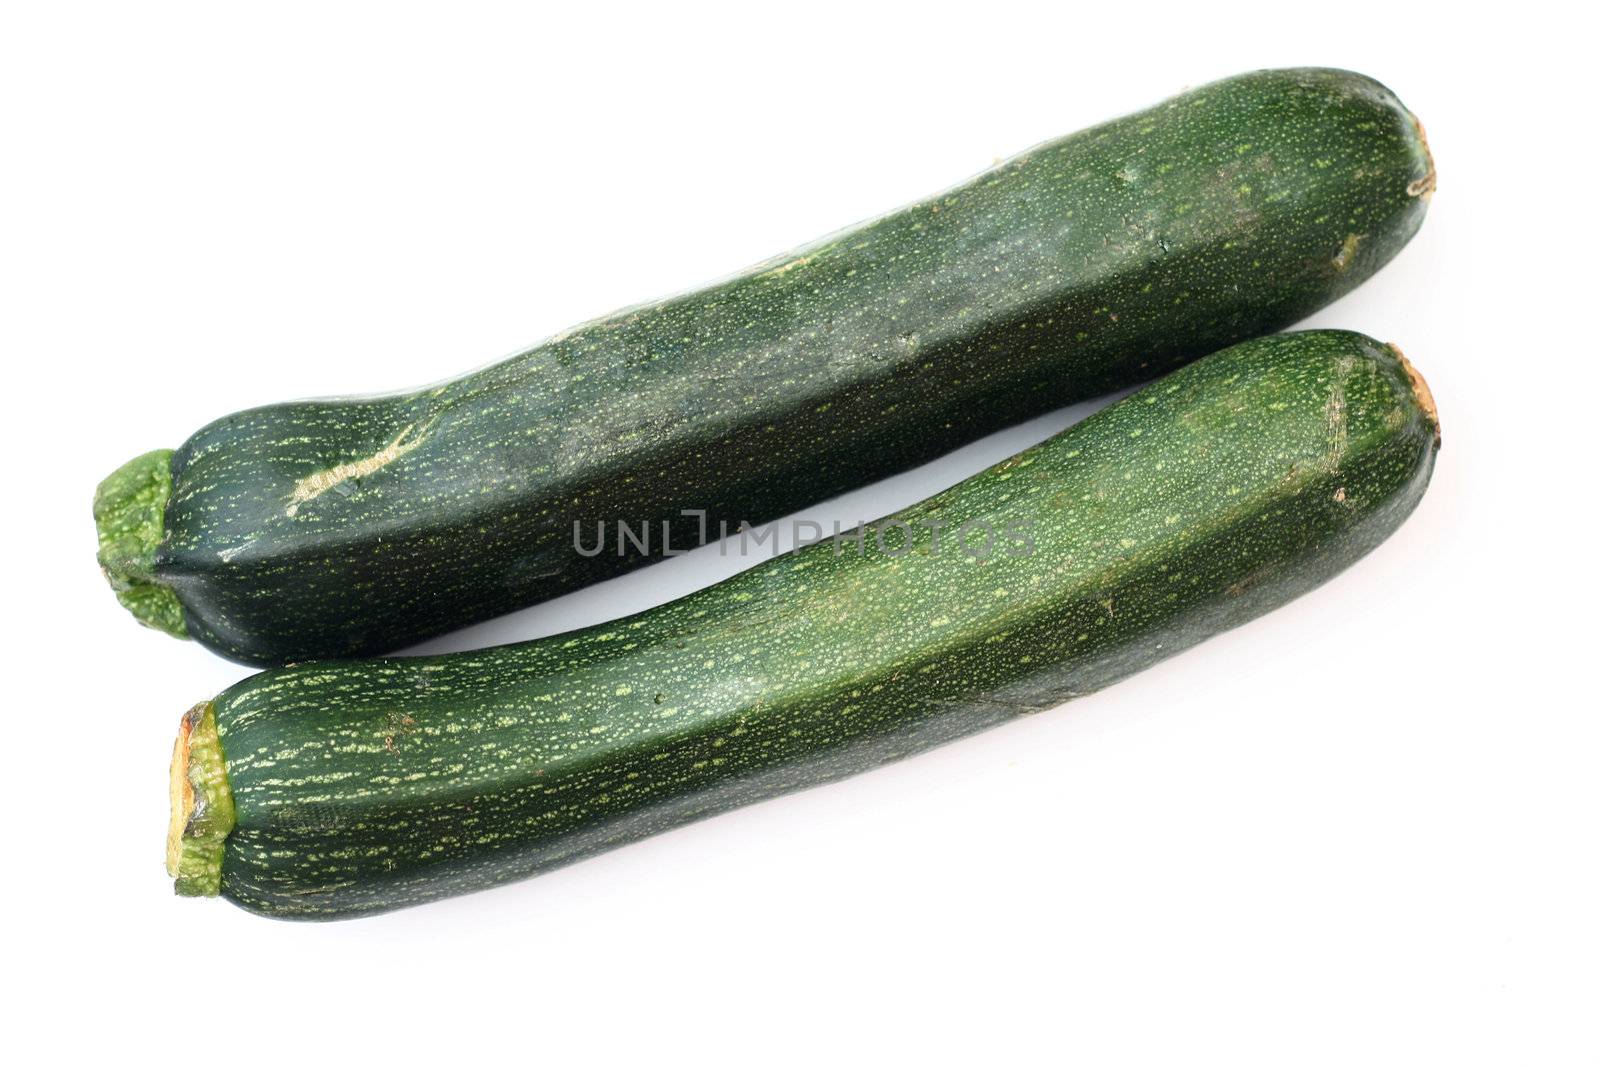 courgettes by leafy